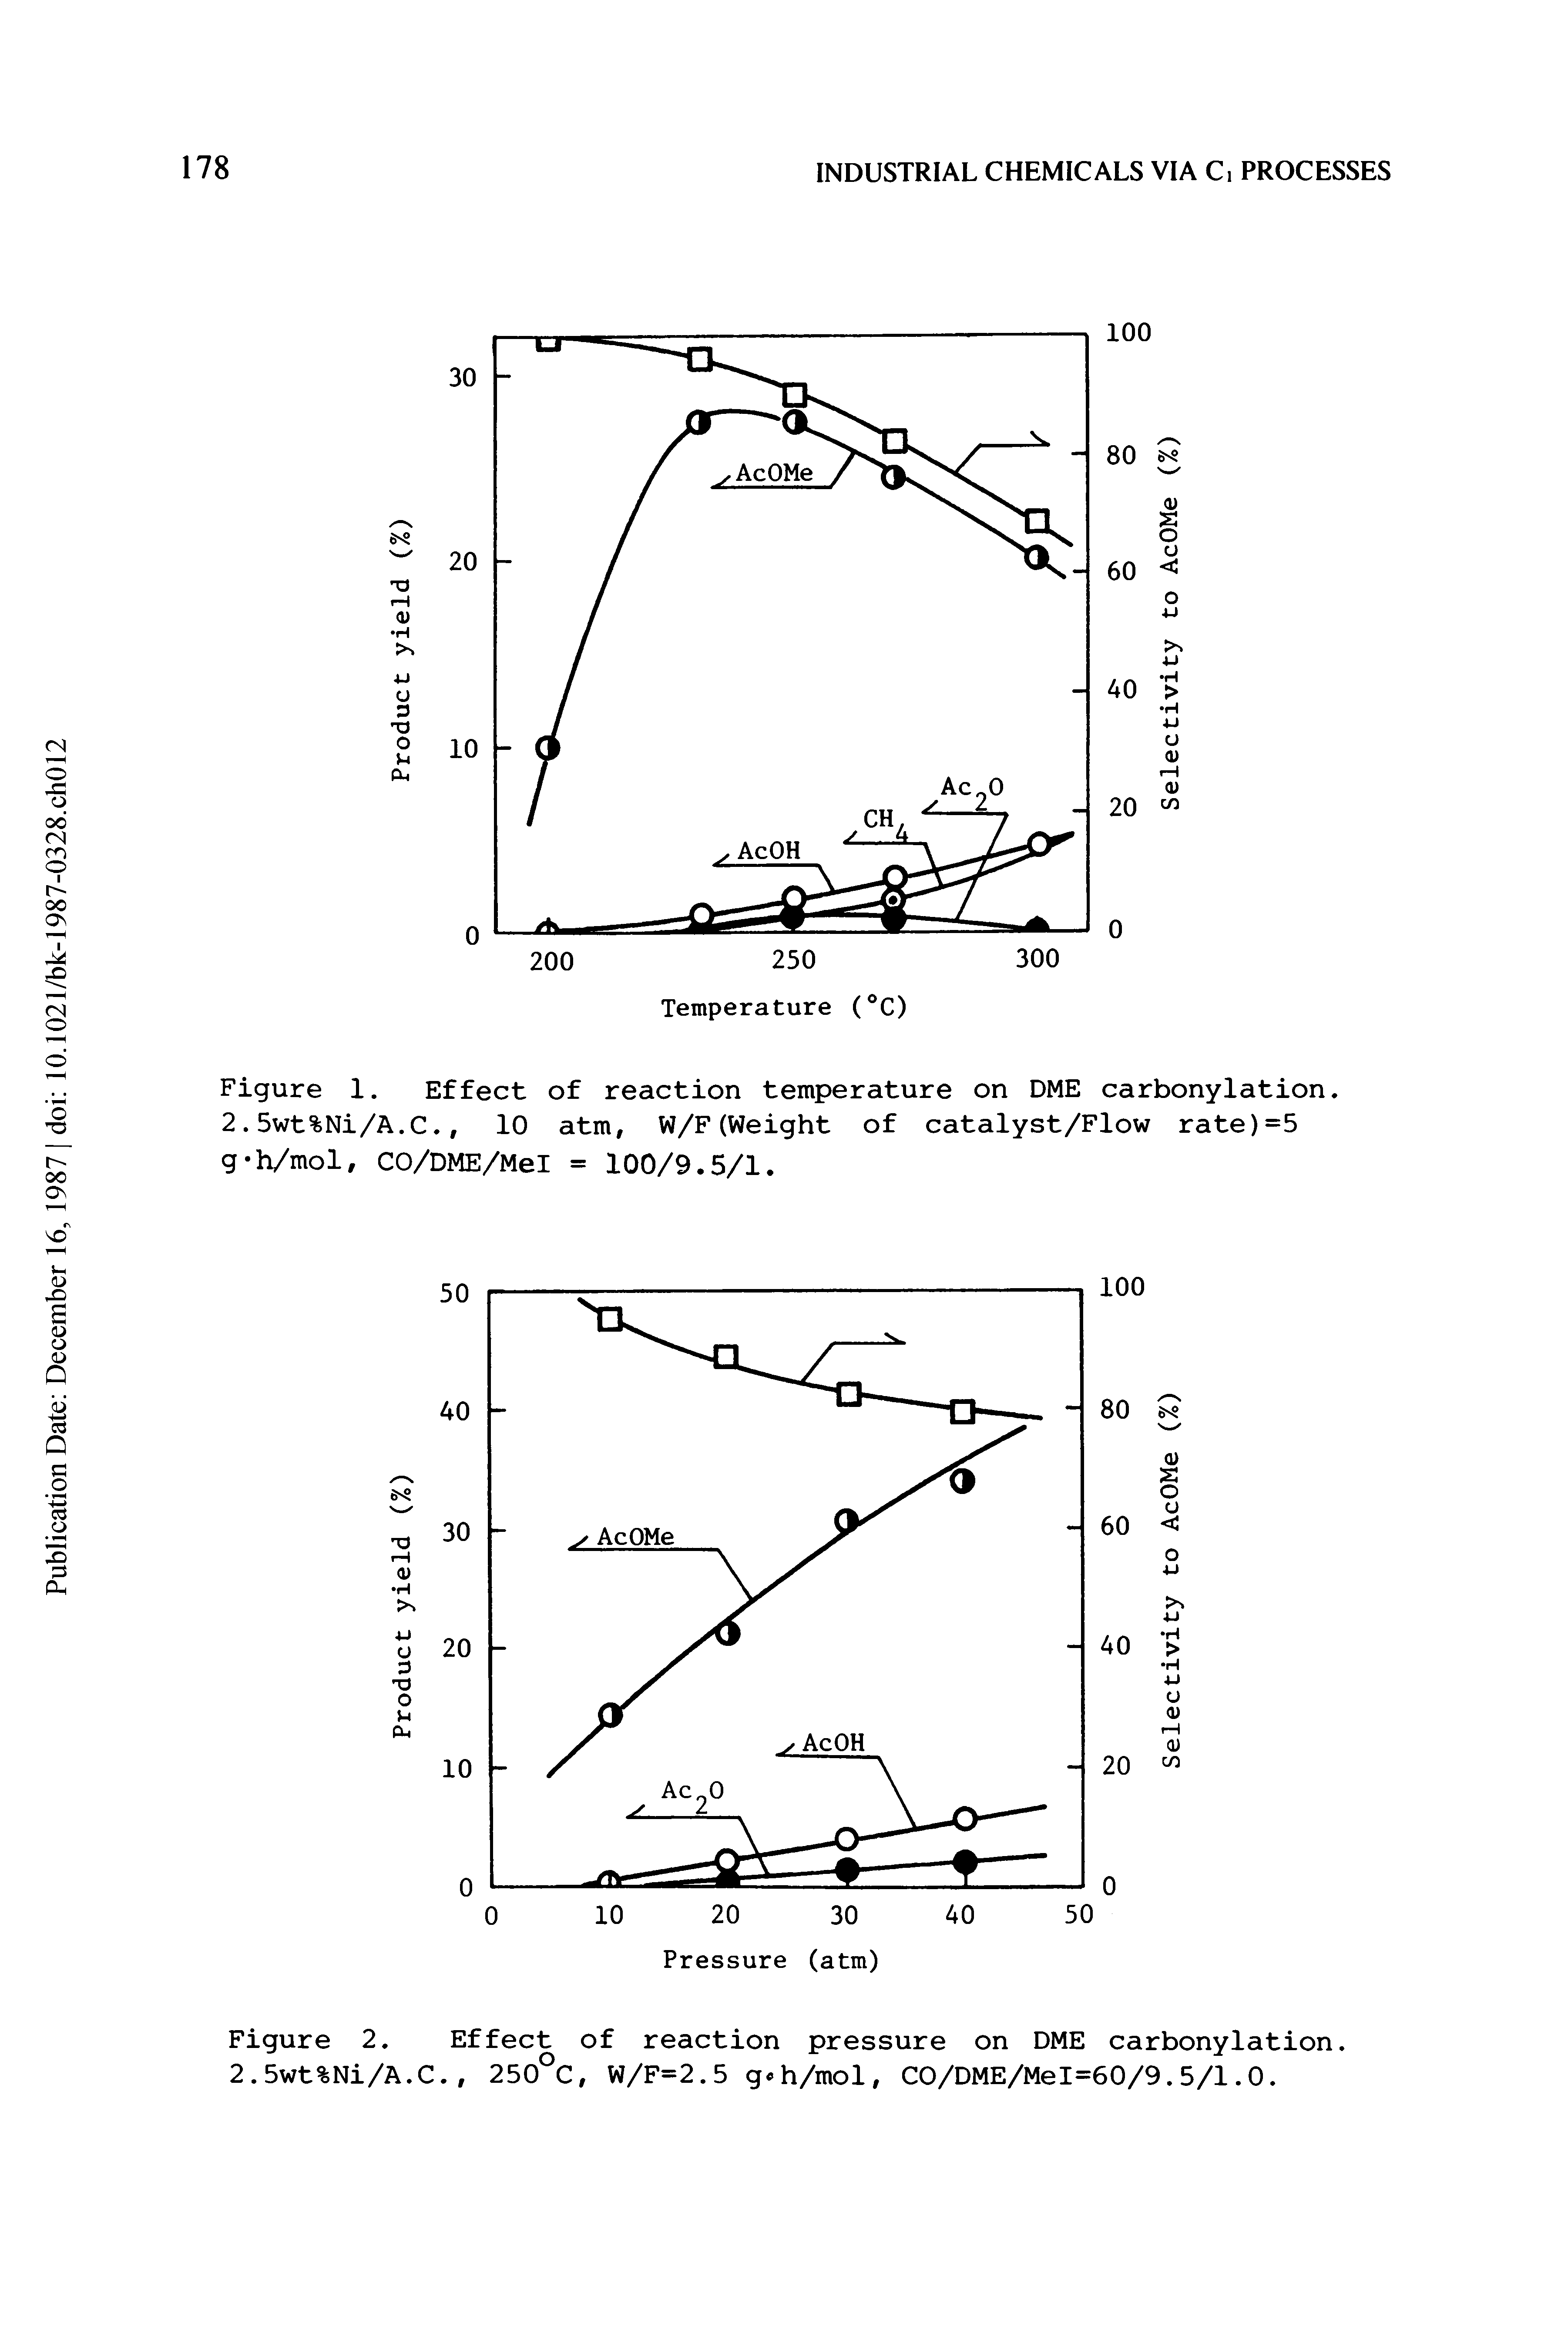 Figure 1. Effect of reaction temperature on DME carbonylation. 2.5wt%Ni/A.C., 10 atm, W/F(Weight of catalyst/Flow rate)=5...